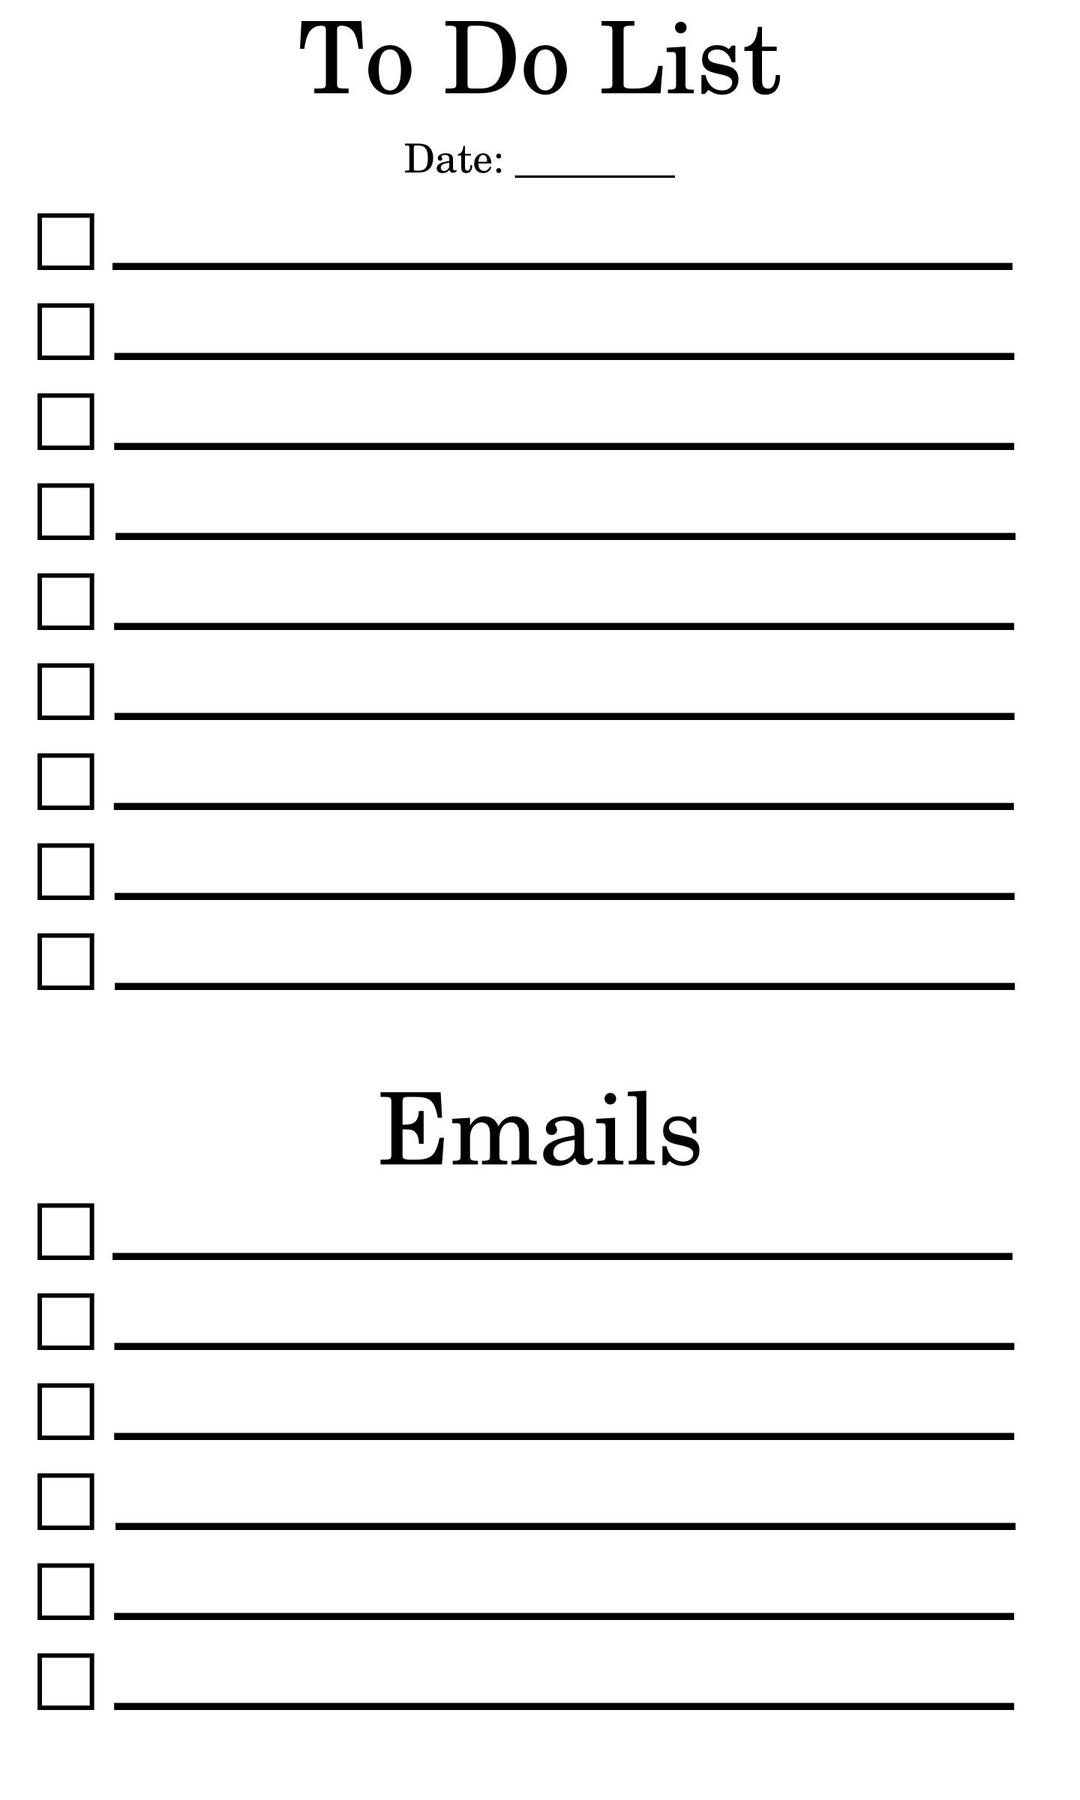 to do list - 3" by 5" note card png transparent